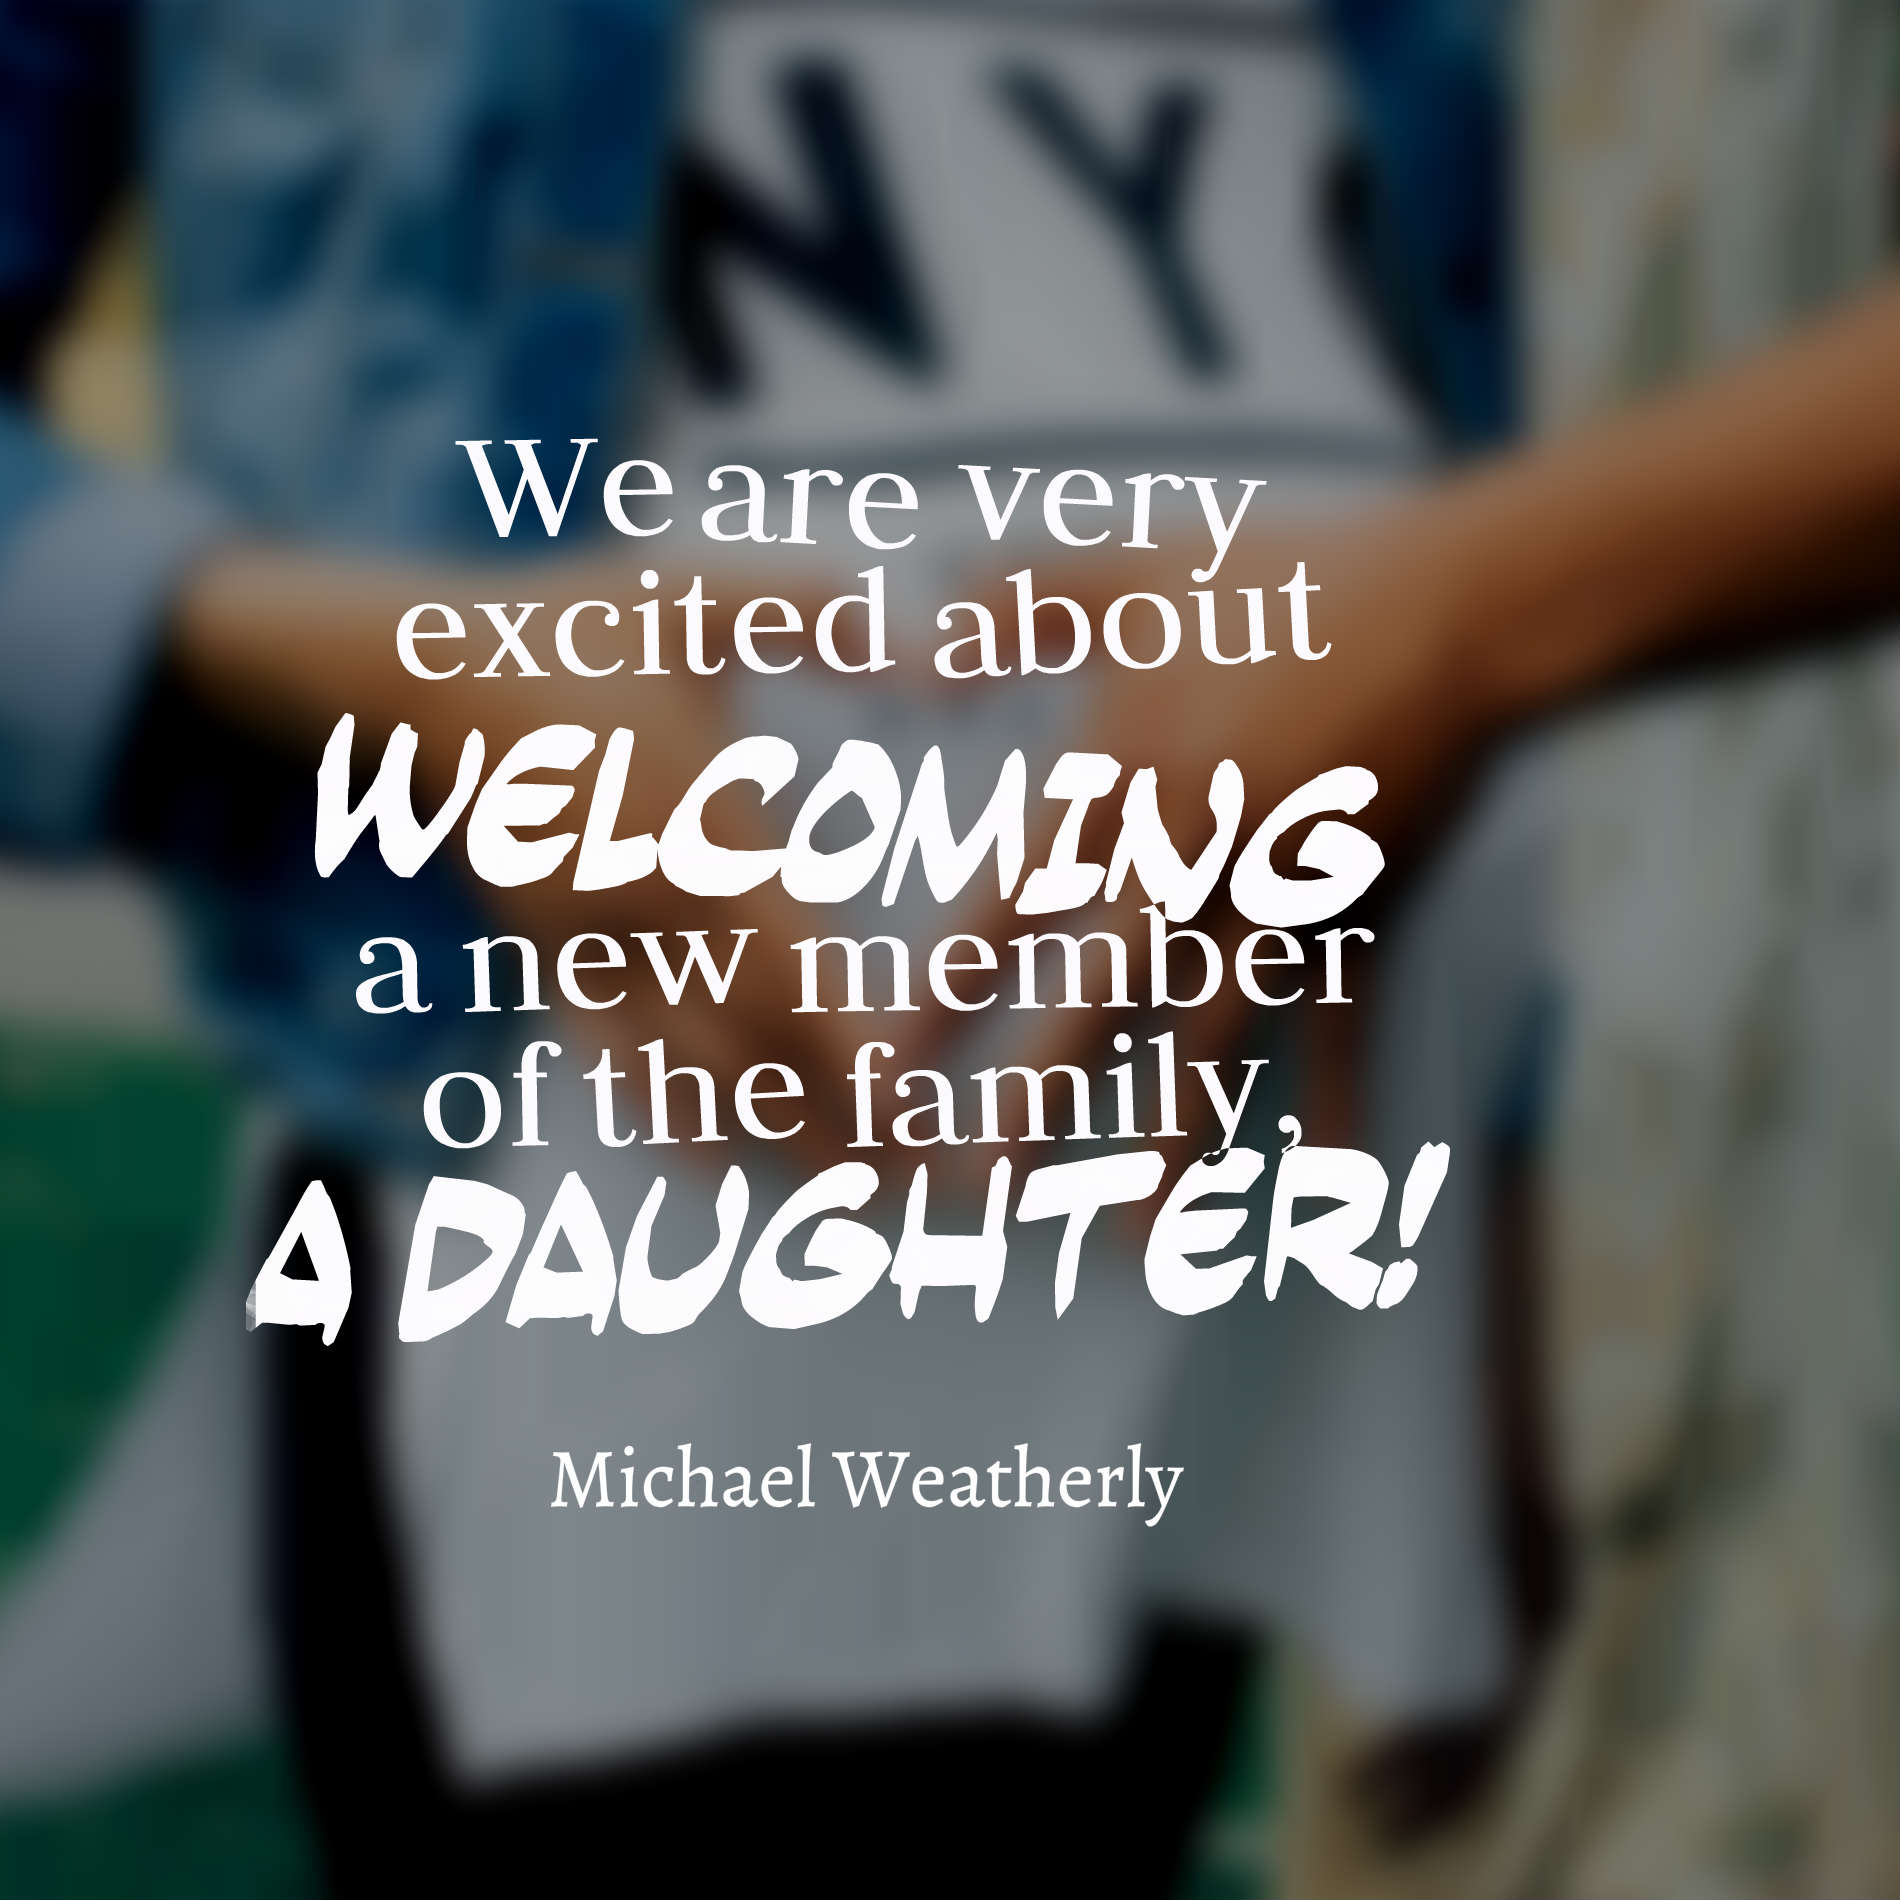 We are very excited about welcoming a new member of the family, a daughter!